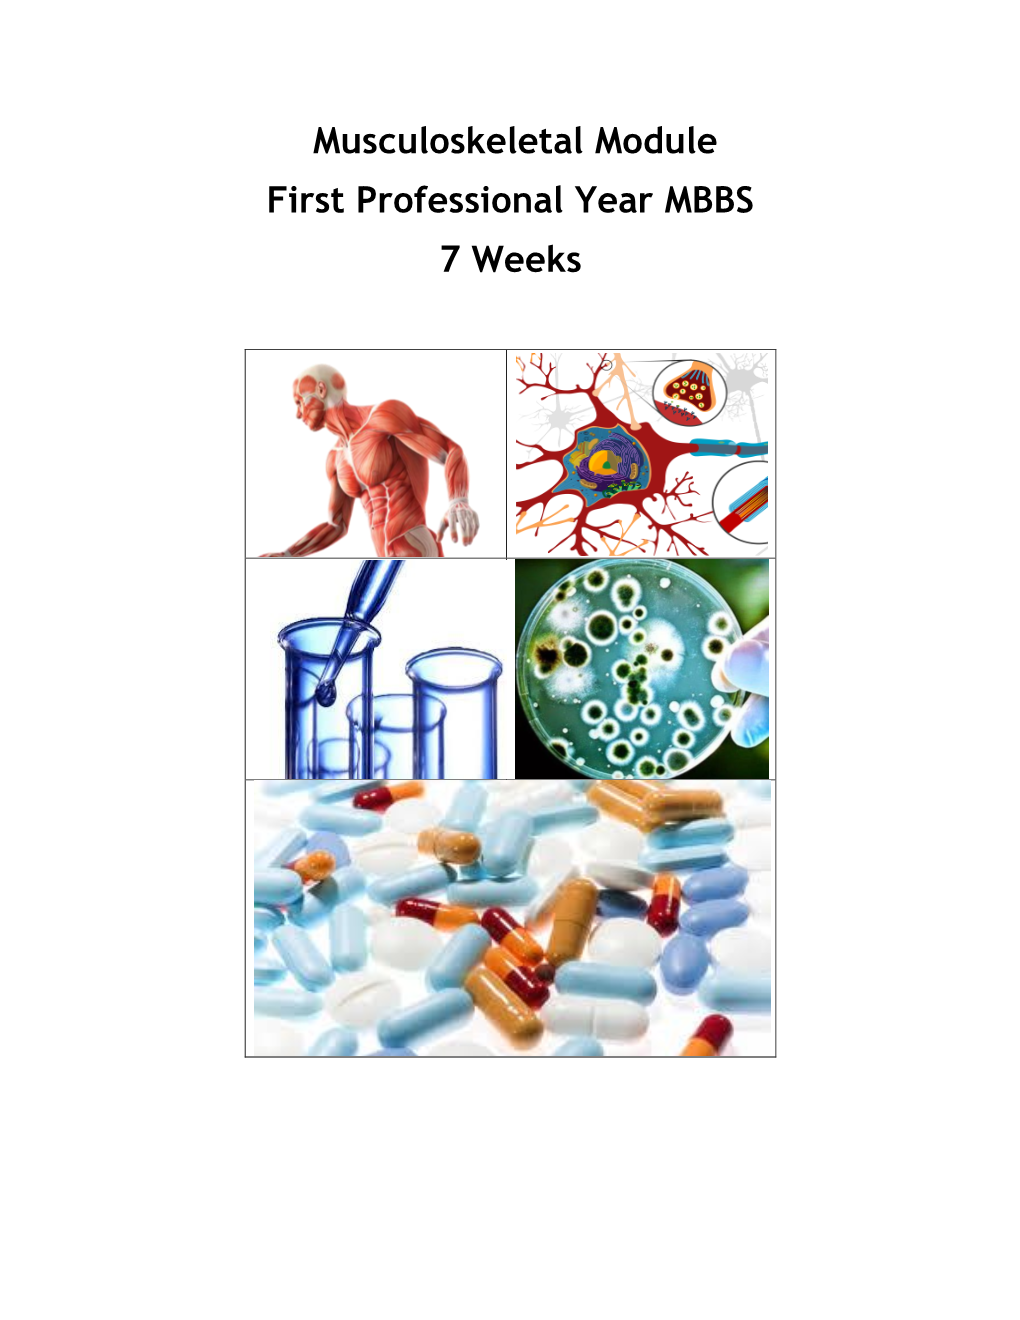 Musculoskeletal Module First Professional Year MBBS 7 Weeks